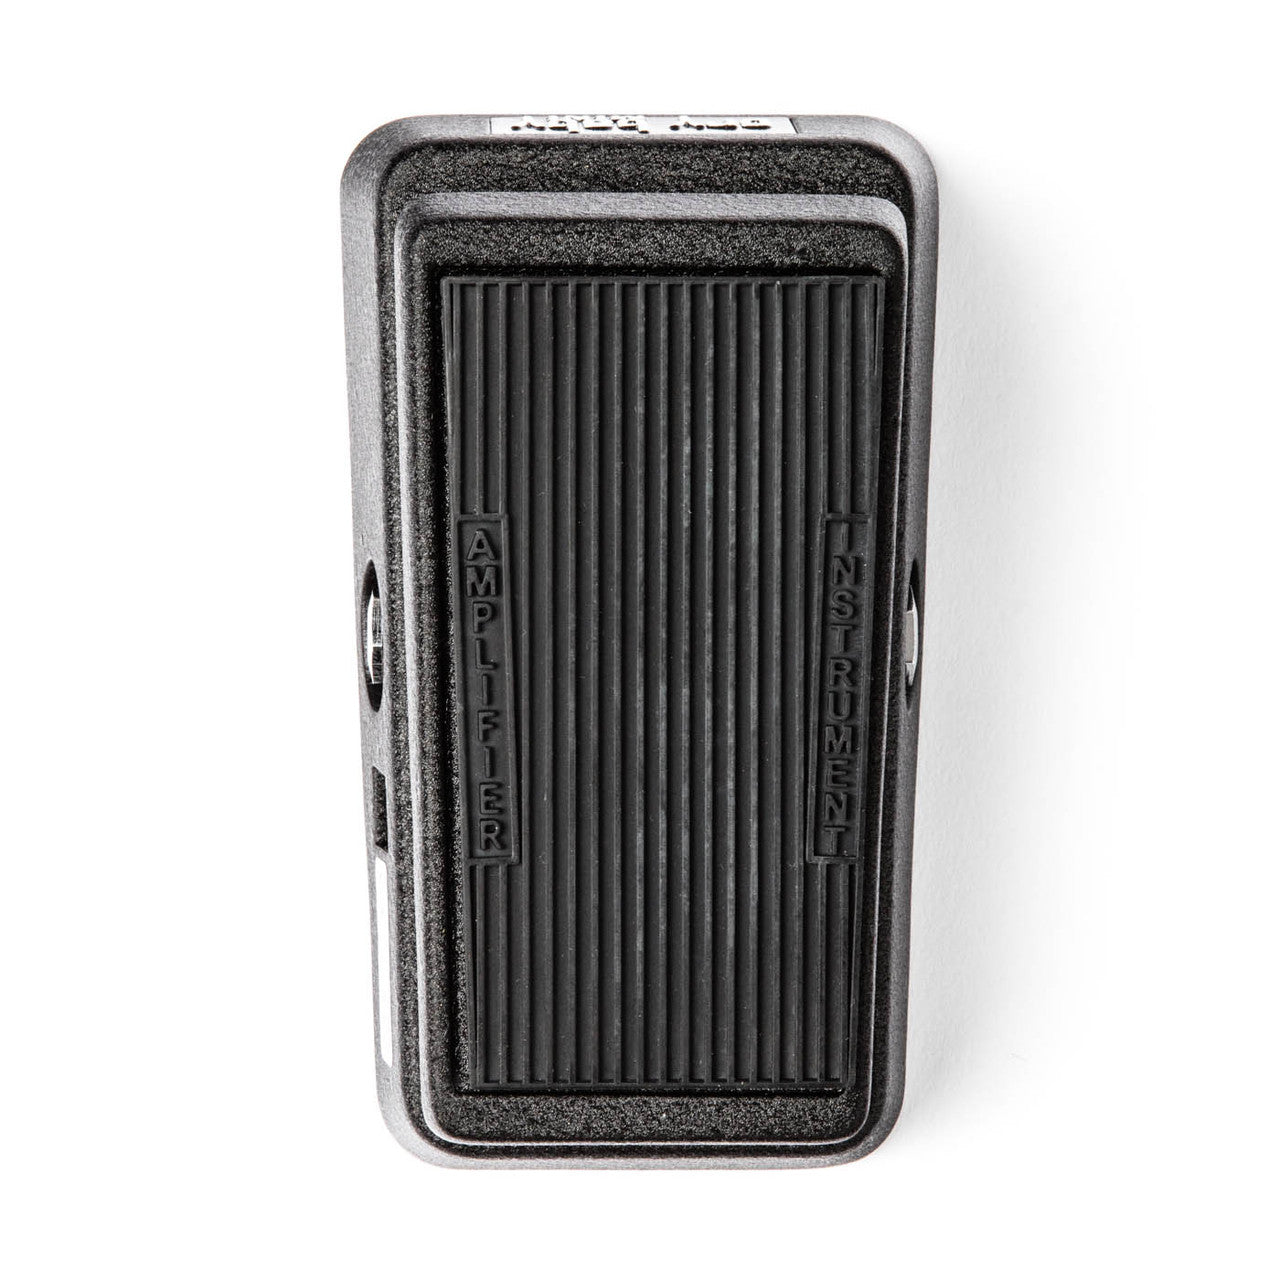 Dunlop Cry Baby Mini Compact Wah Pedal For Guitar